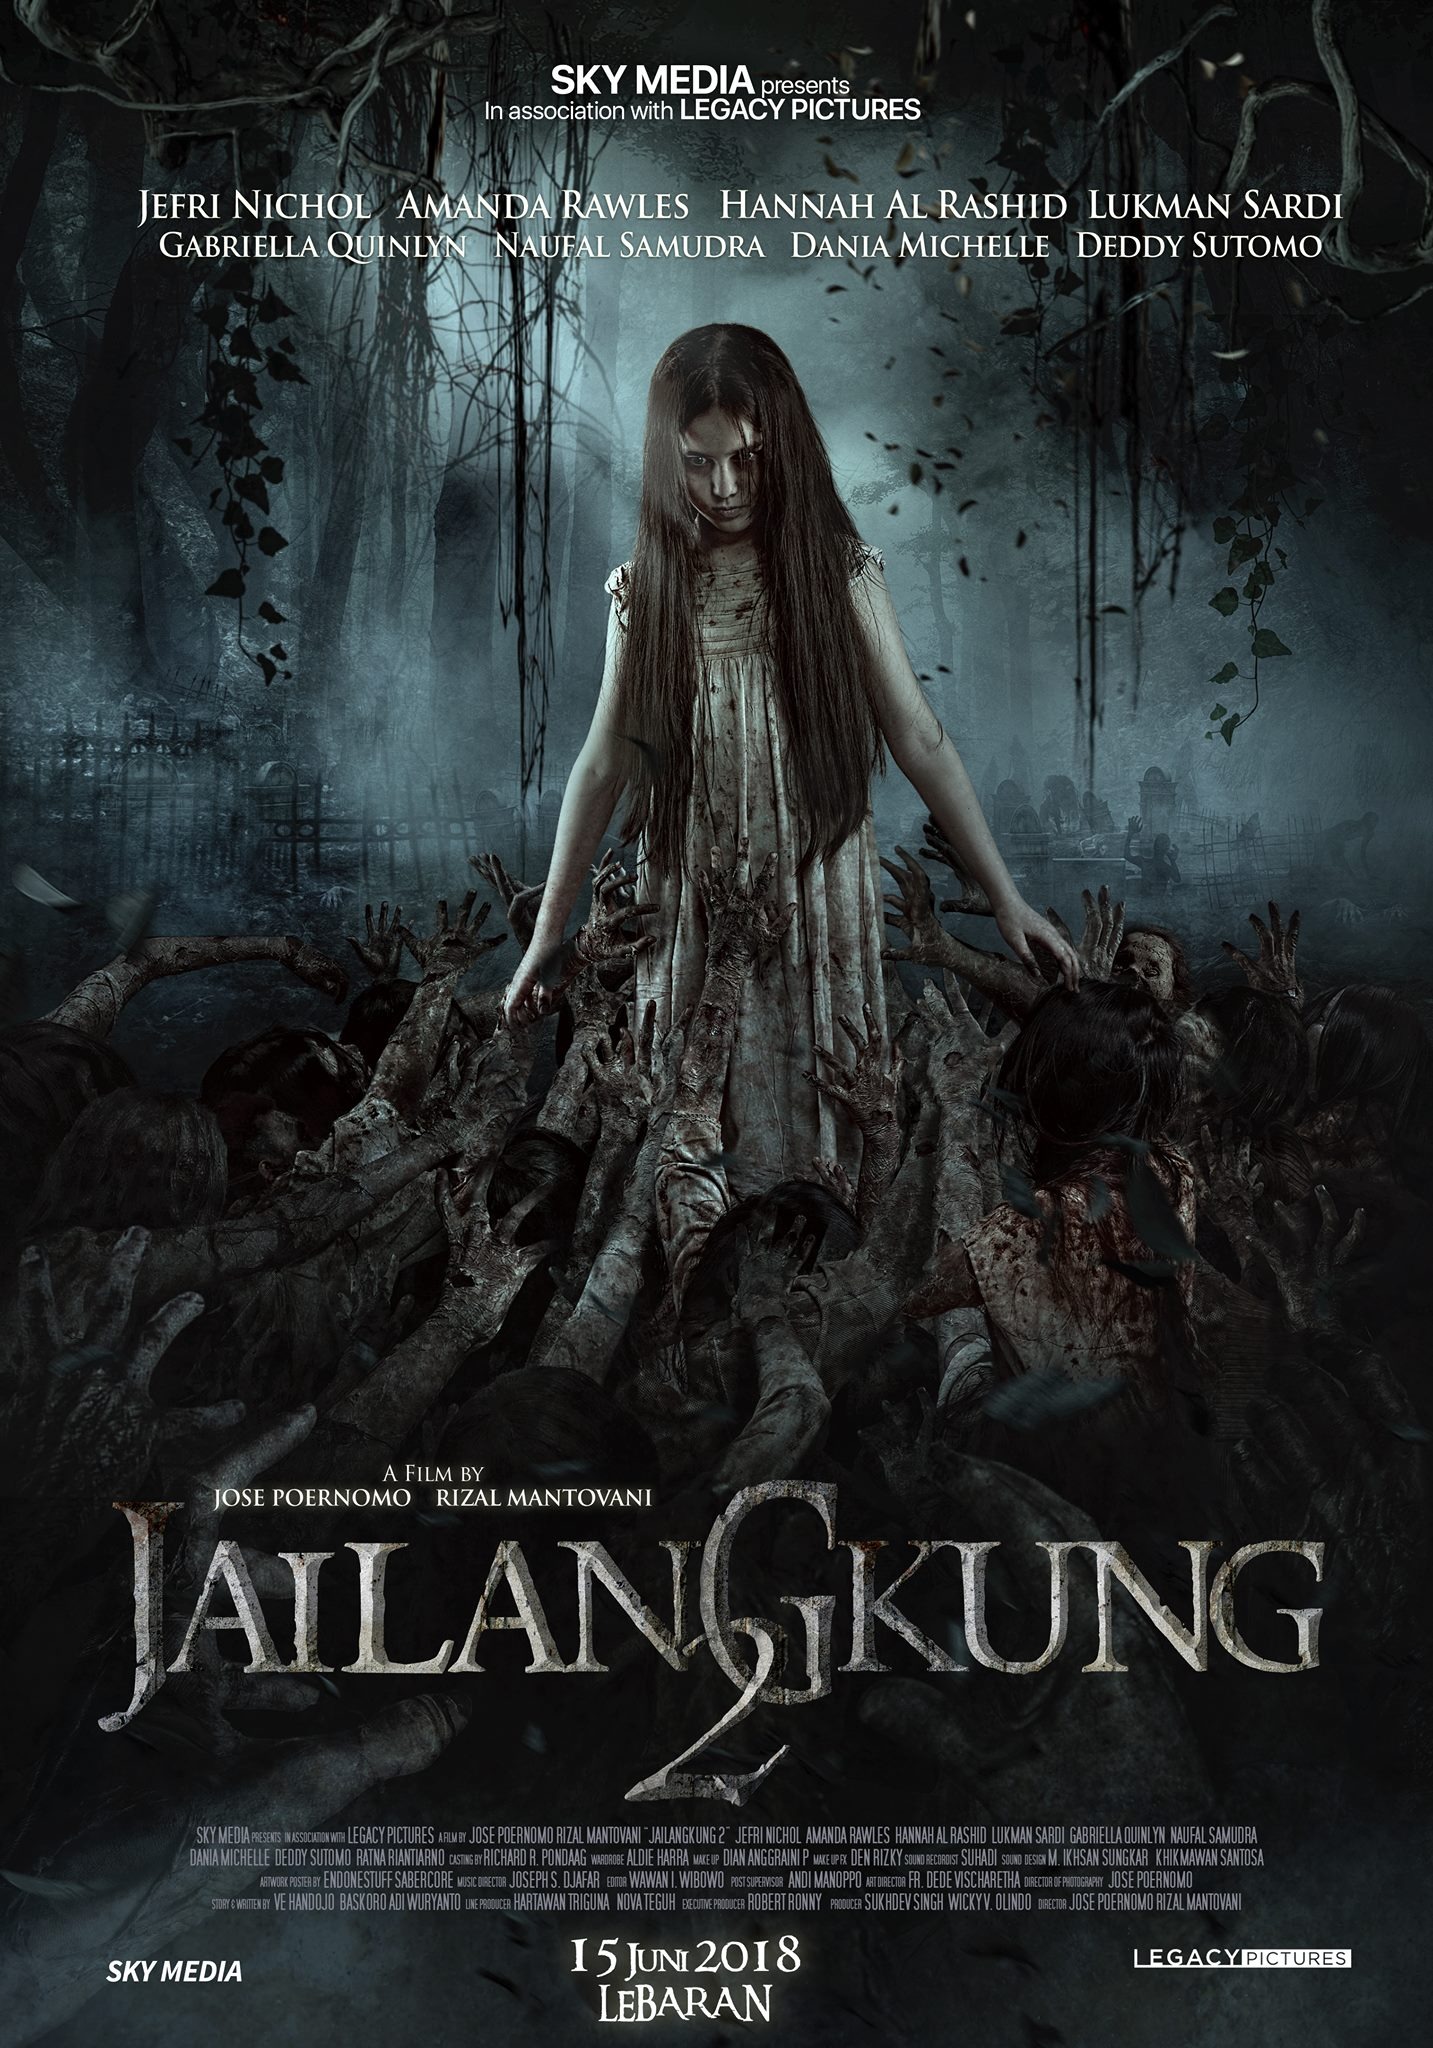 Mega Sized Movie Poster Image for Jailangkung 2 (#1 of 2)